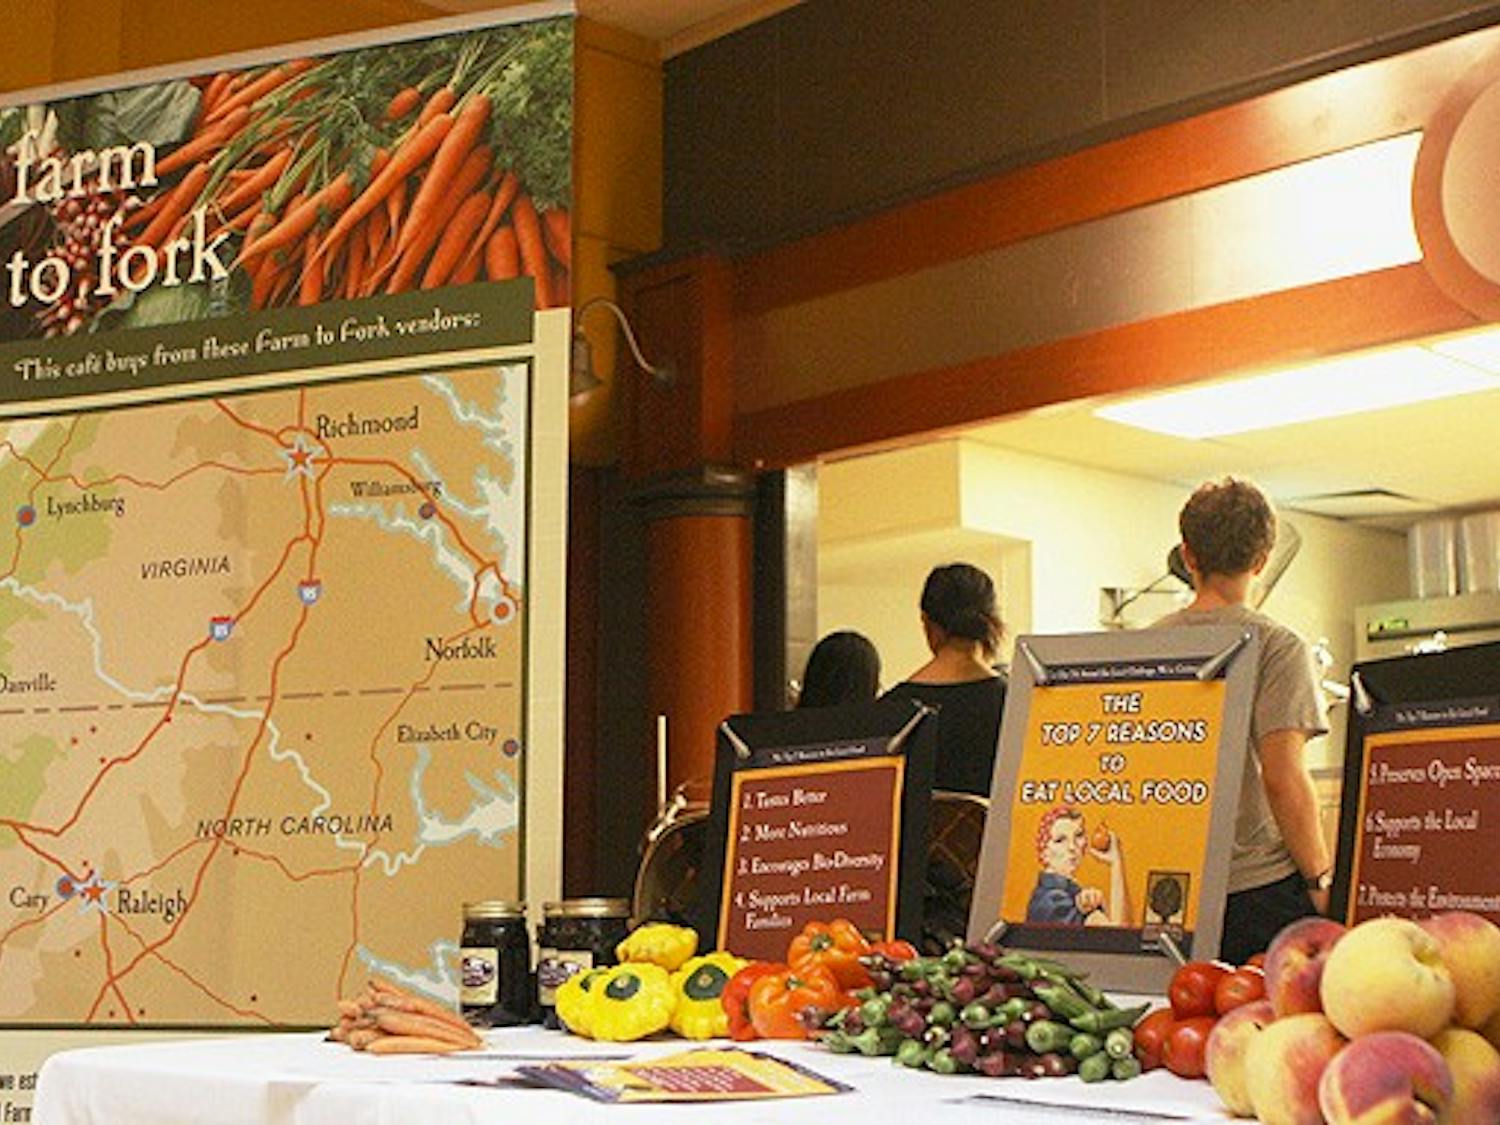 The Eat Local Challenge featured products from 40 local farms in Bon Appetit eateries Tuesday.